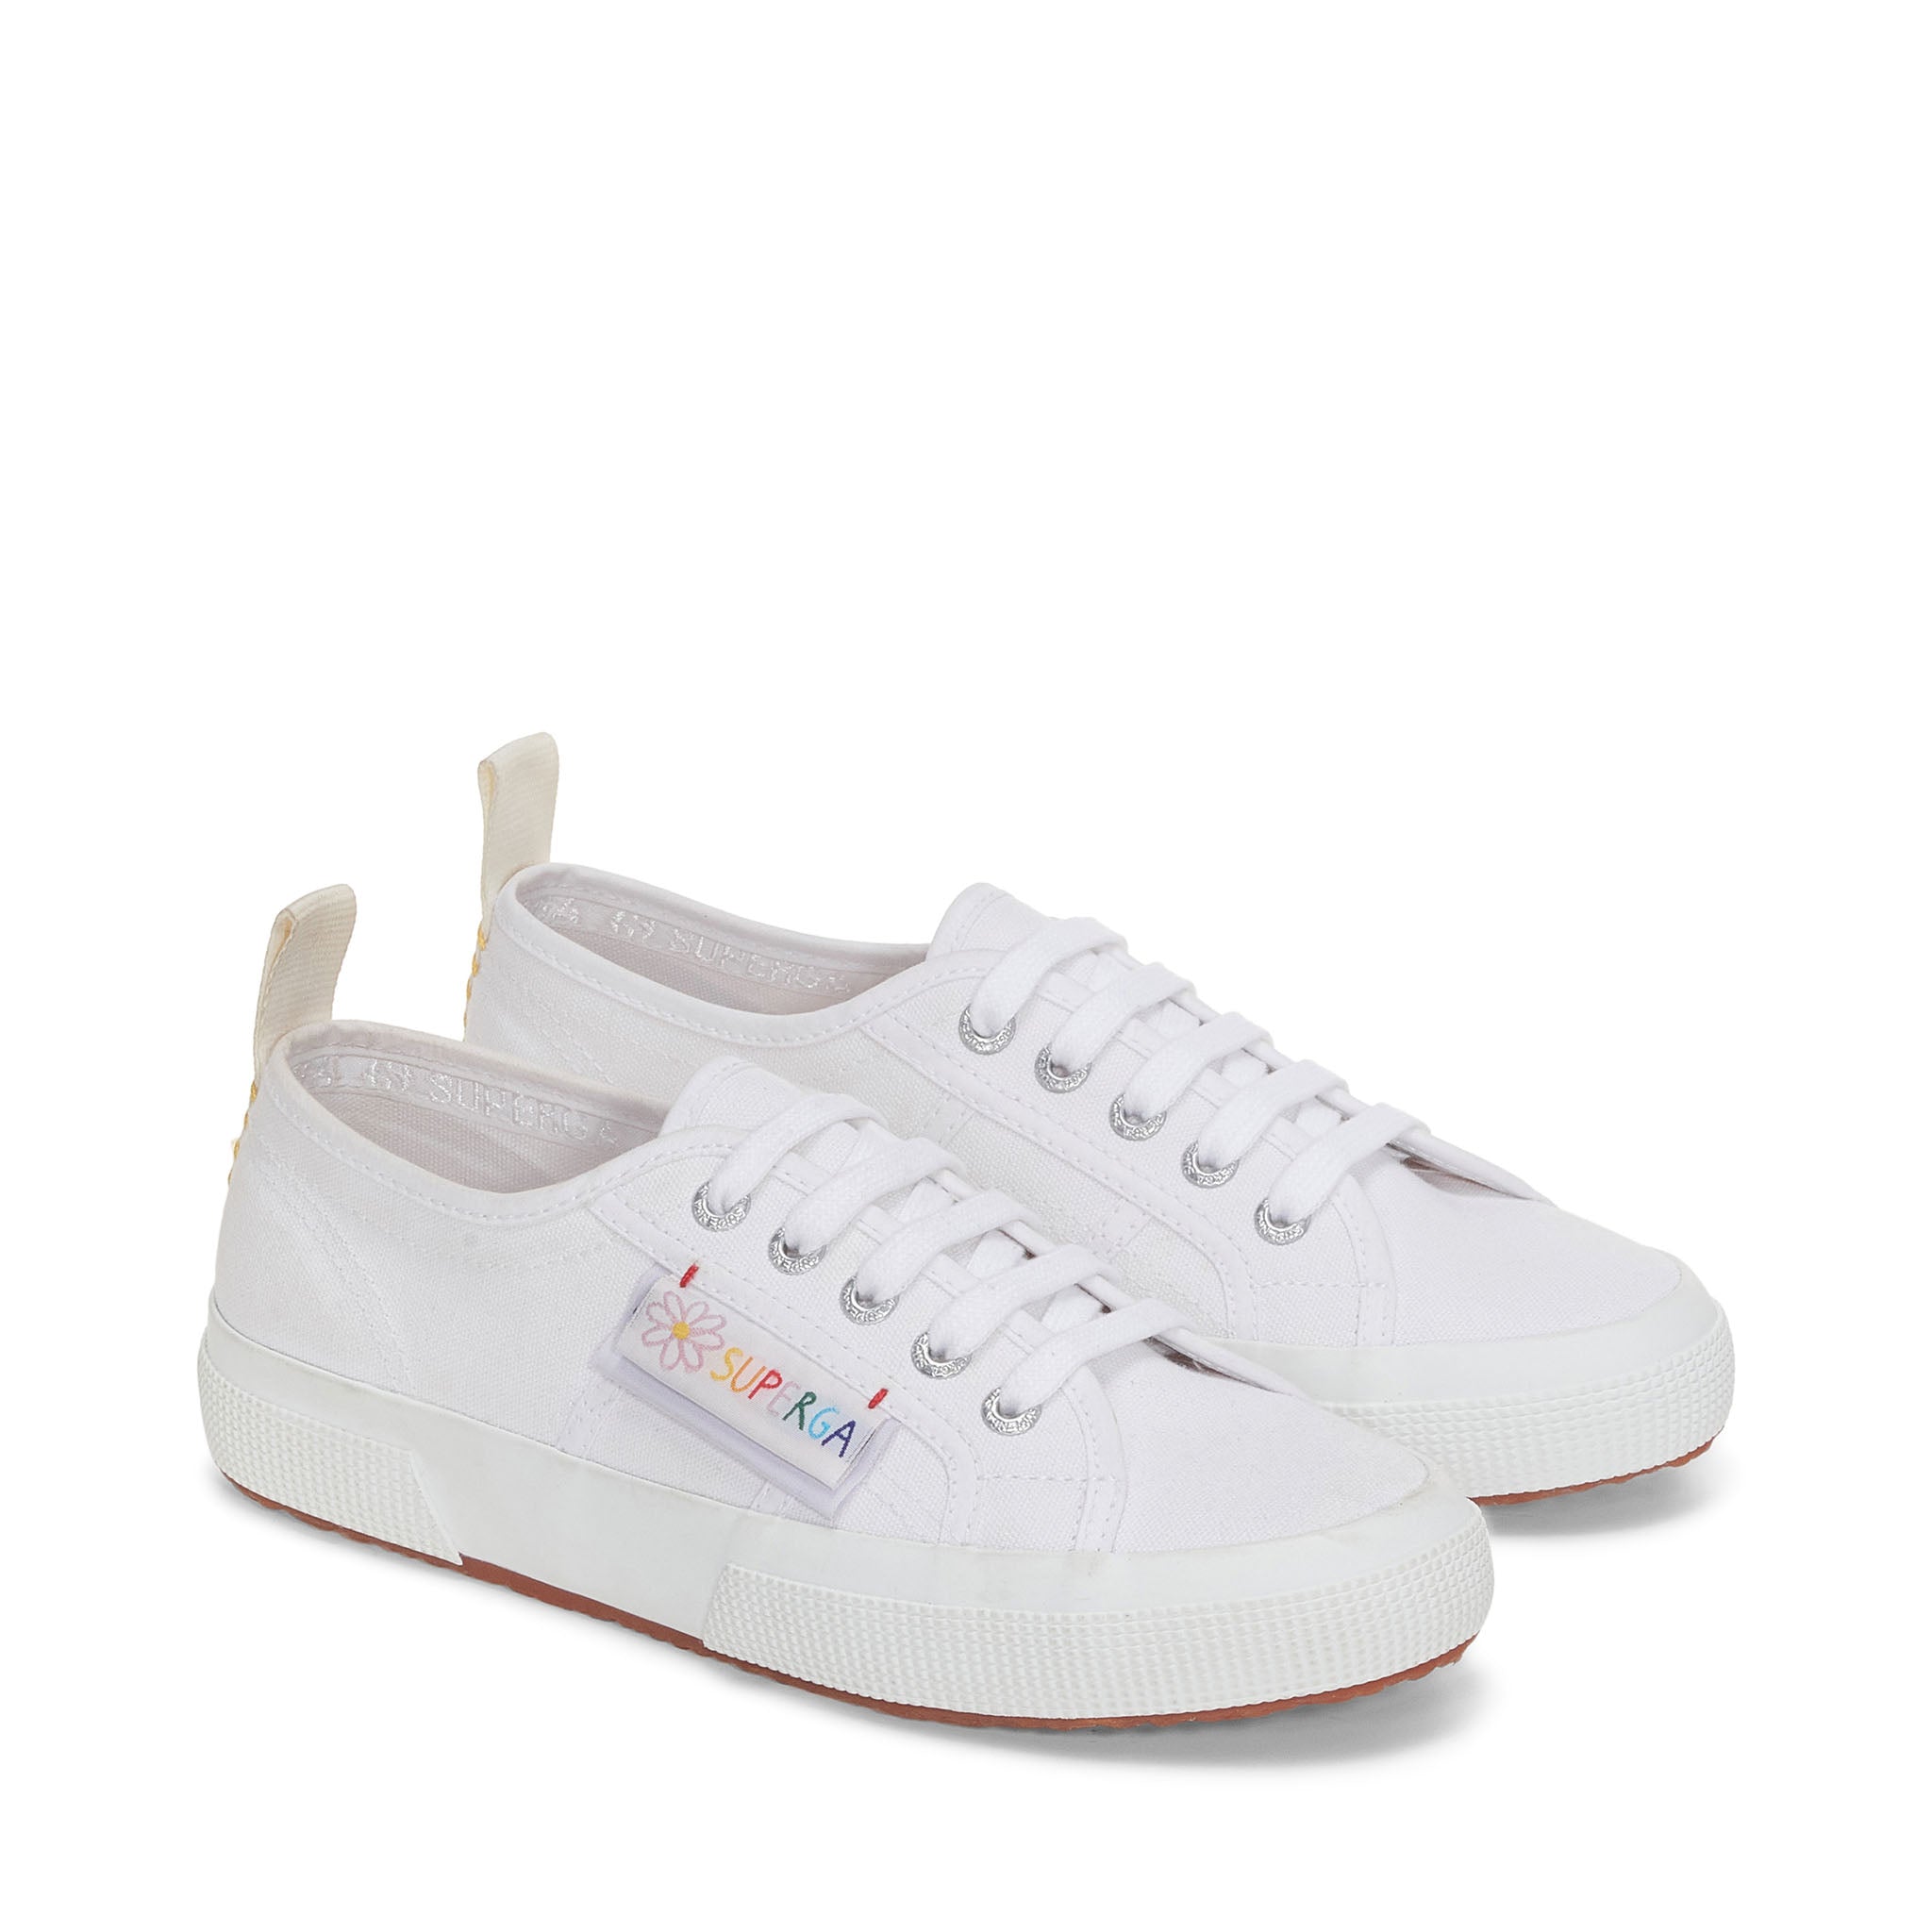 Superga 2750 Happy Label Sneakers - White Multicolor Flower Label. Front view.